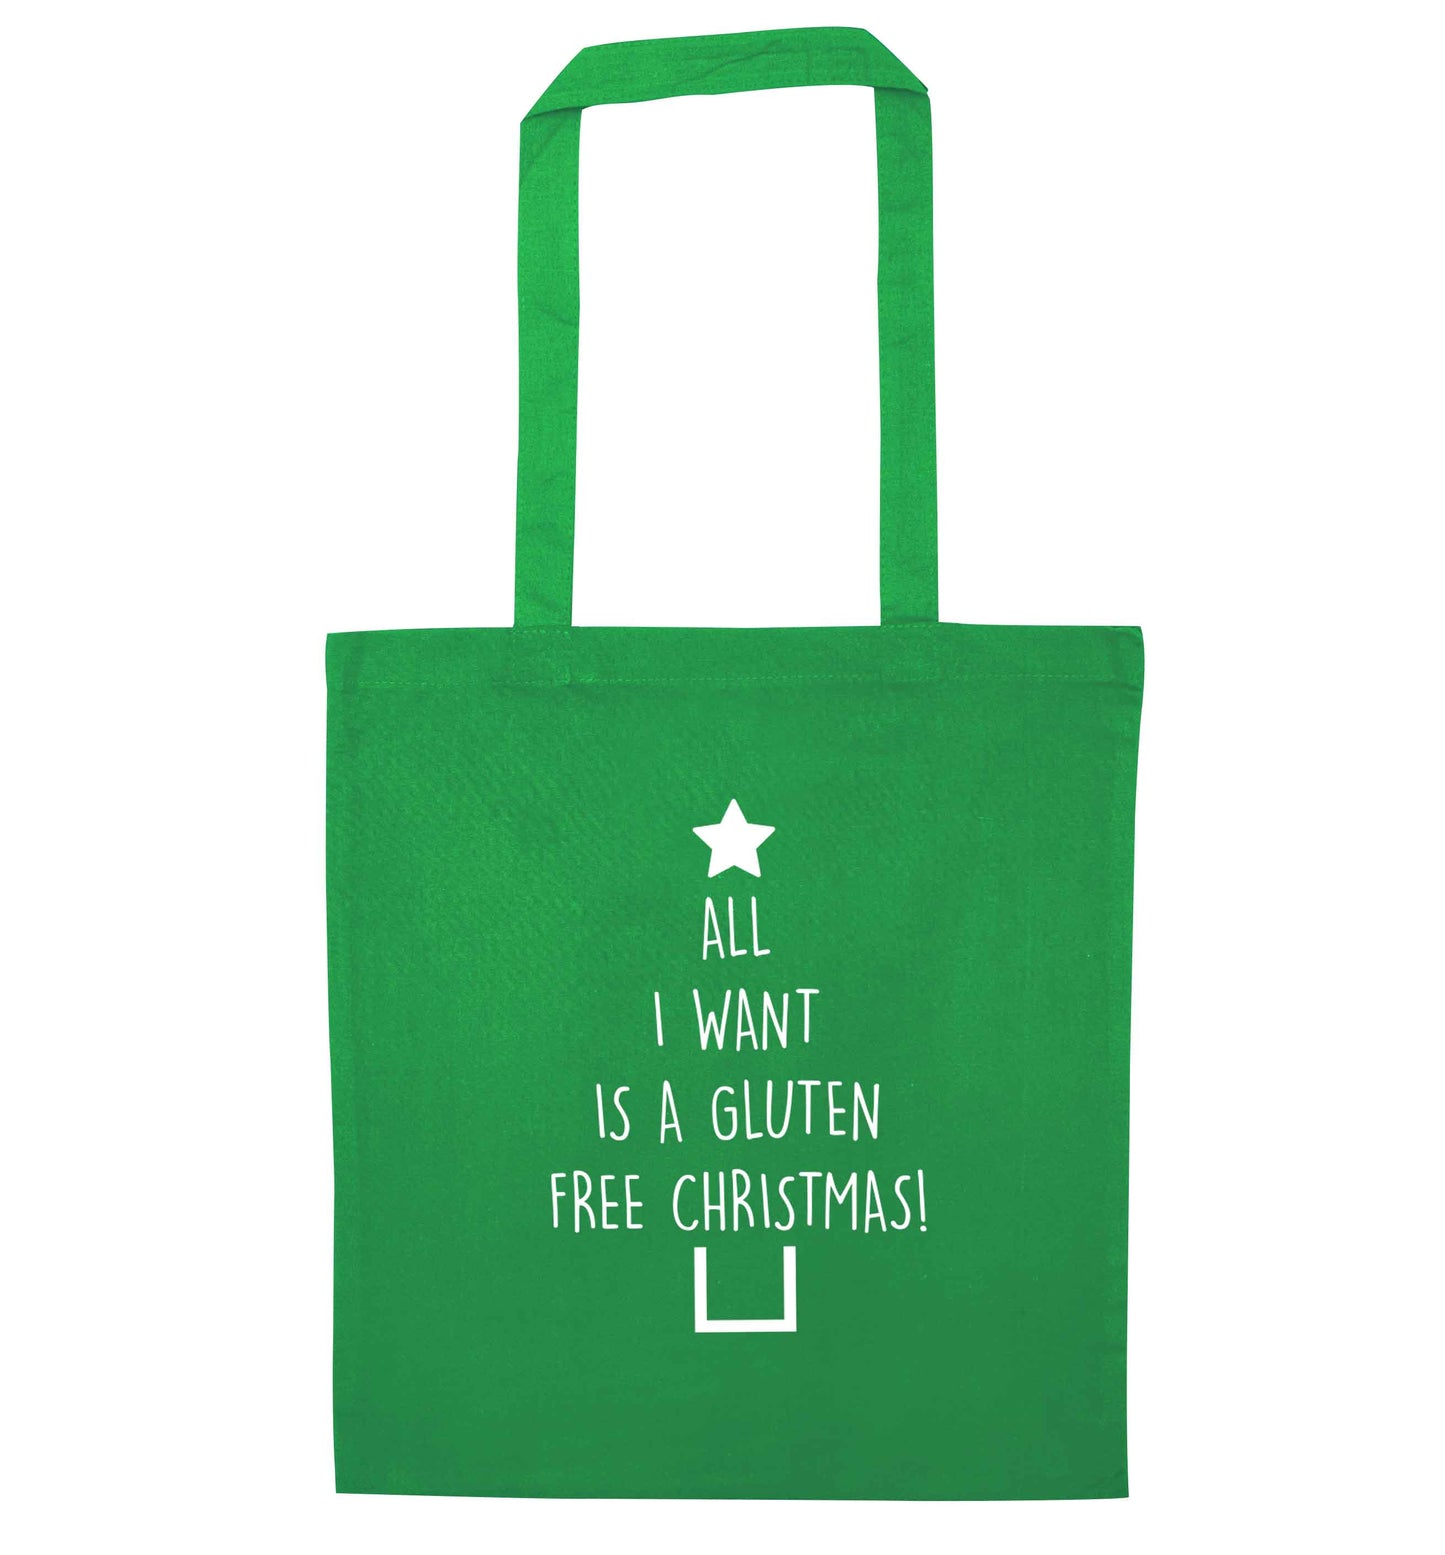 All I want is a gluten free Christmas green tote bag